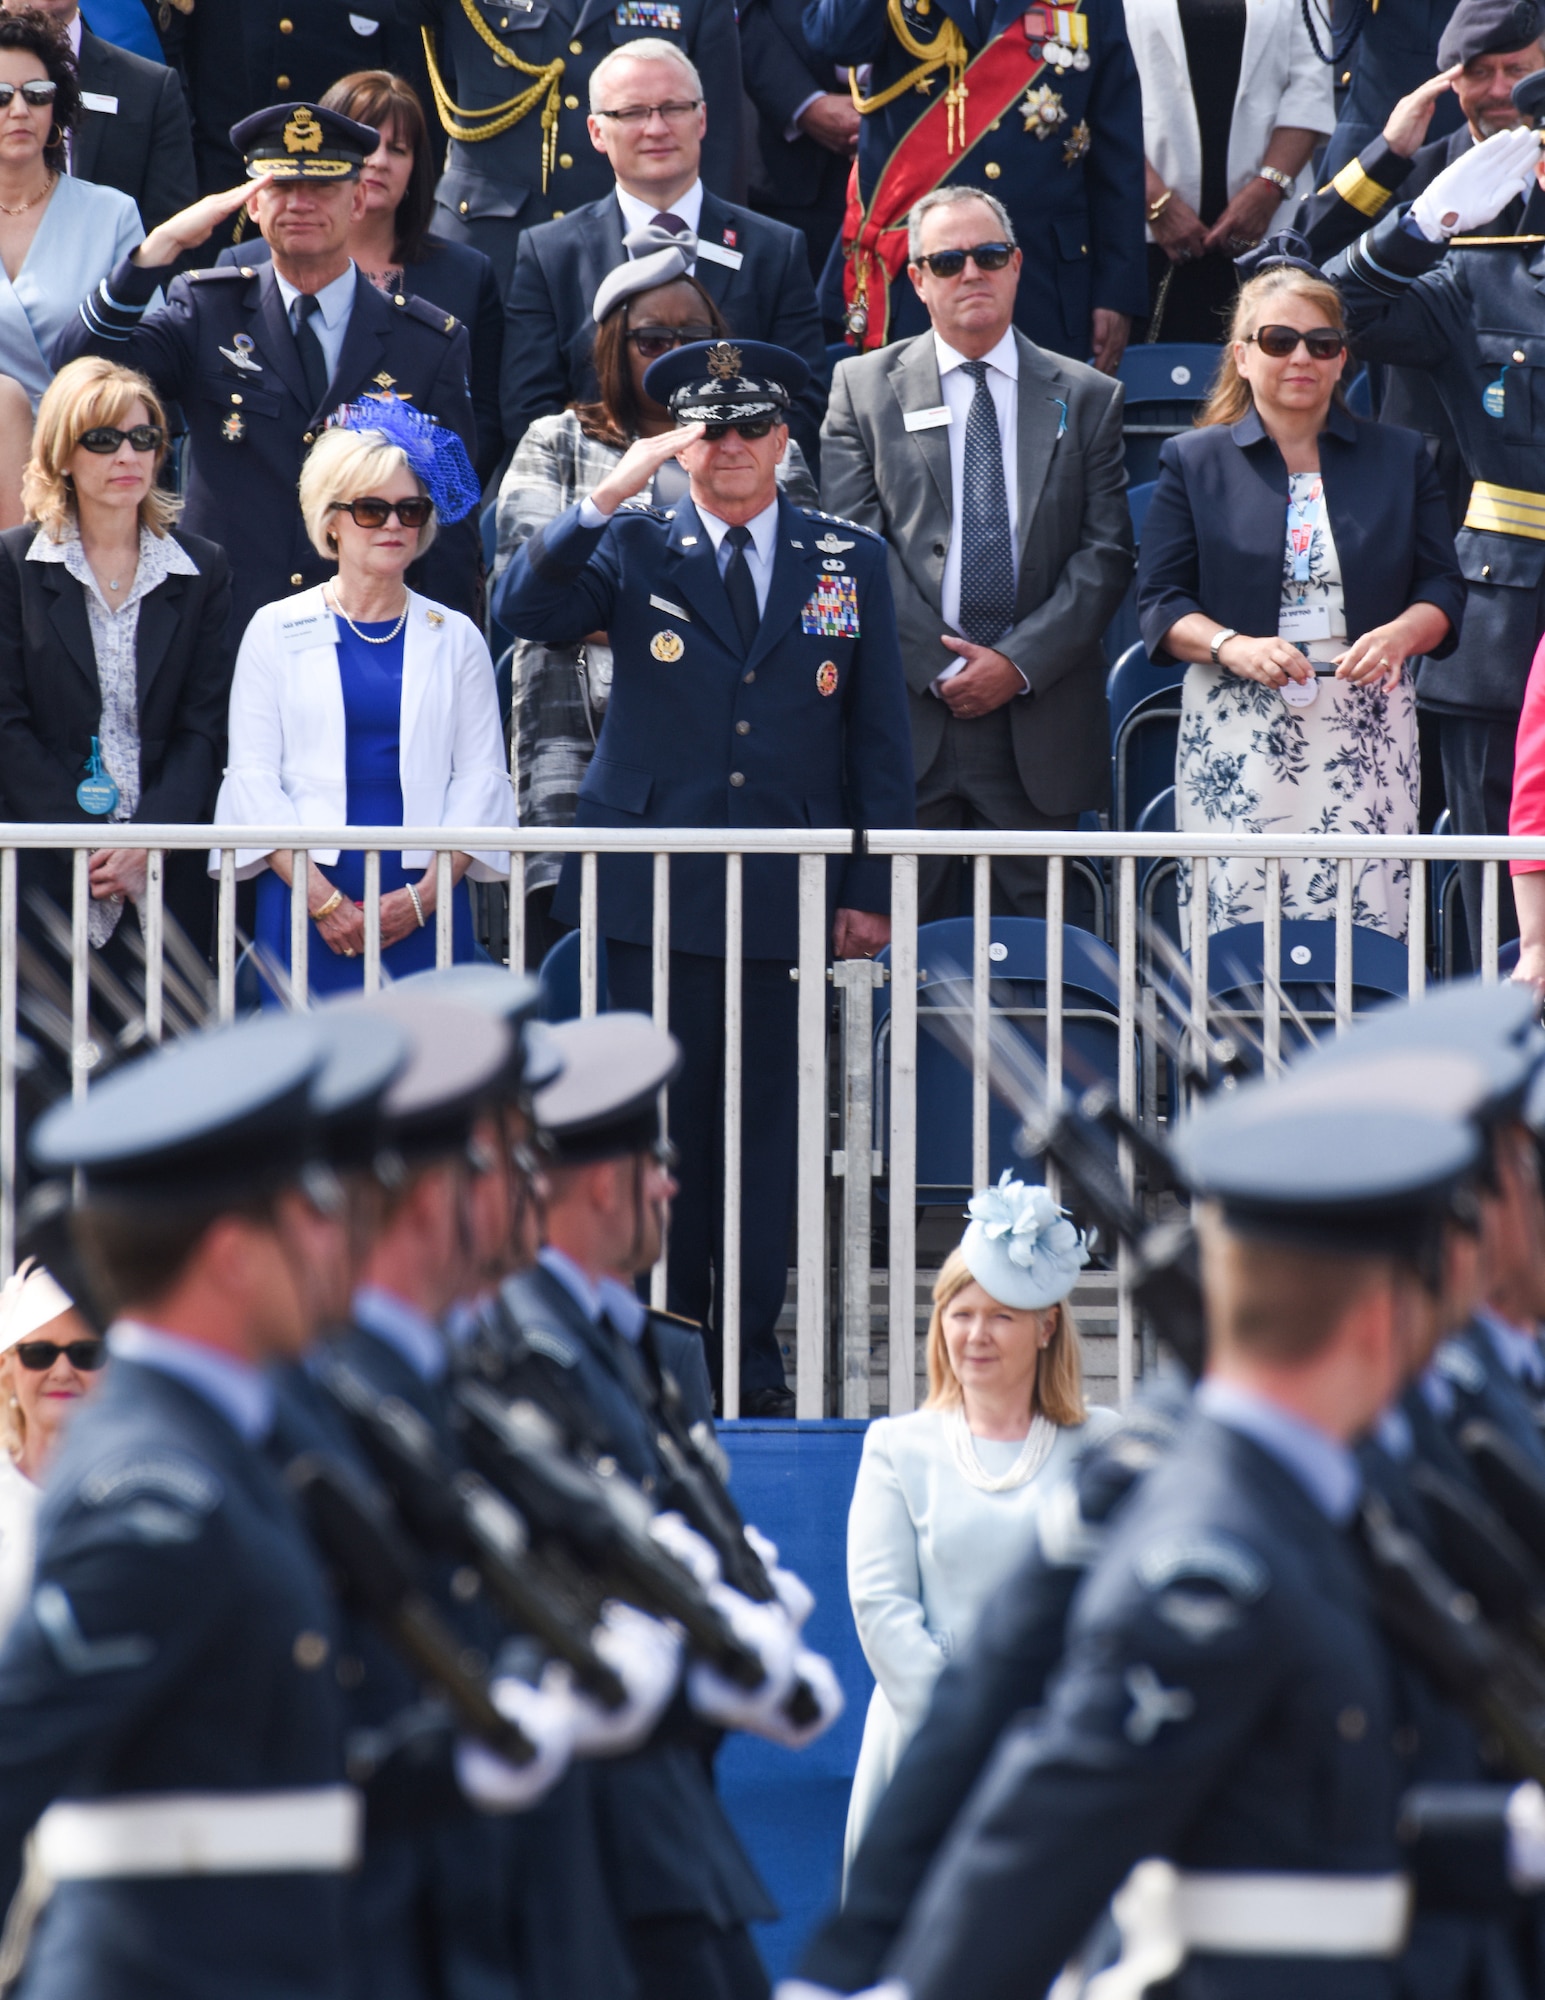 U.S. Air Force General David L. Goldfein (center), Chief of Staff of the USAF, salutes members of the Royal Air Force during the 2018 Royal International Air Tattoo at RAF Fairford, United Kingdom on July 13, 2018. This year’s RIAT celebrated the 100th anniversary of the RAF and highlighted the United States’ ever-strong alliance with the UK. (U.S. Air Force photo by TSgt Brian Kimball)